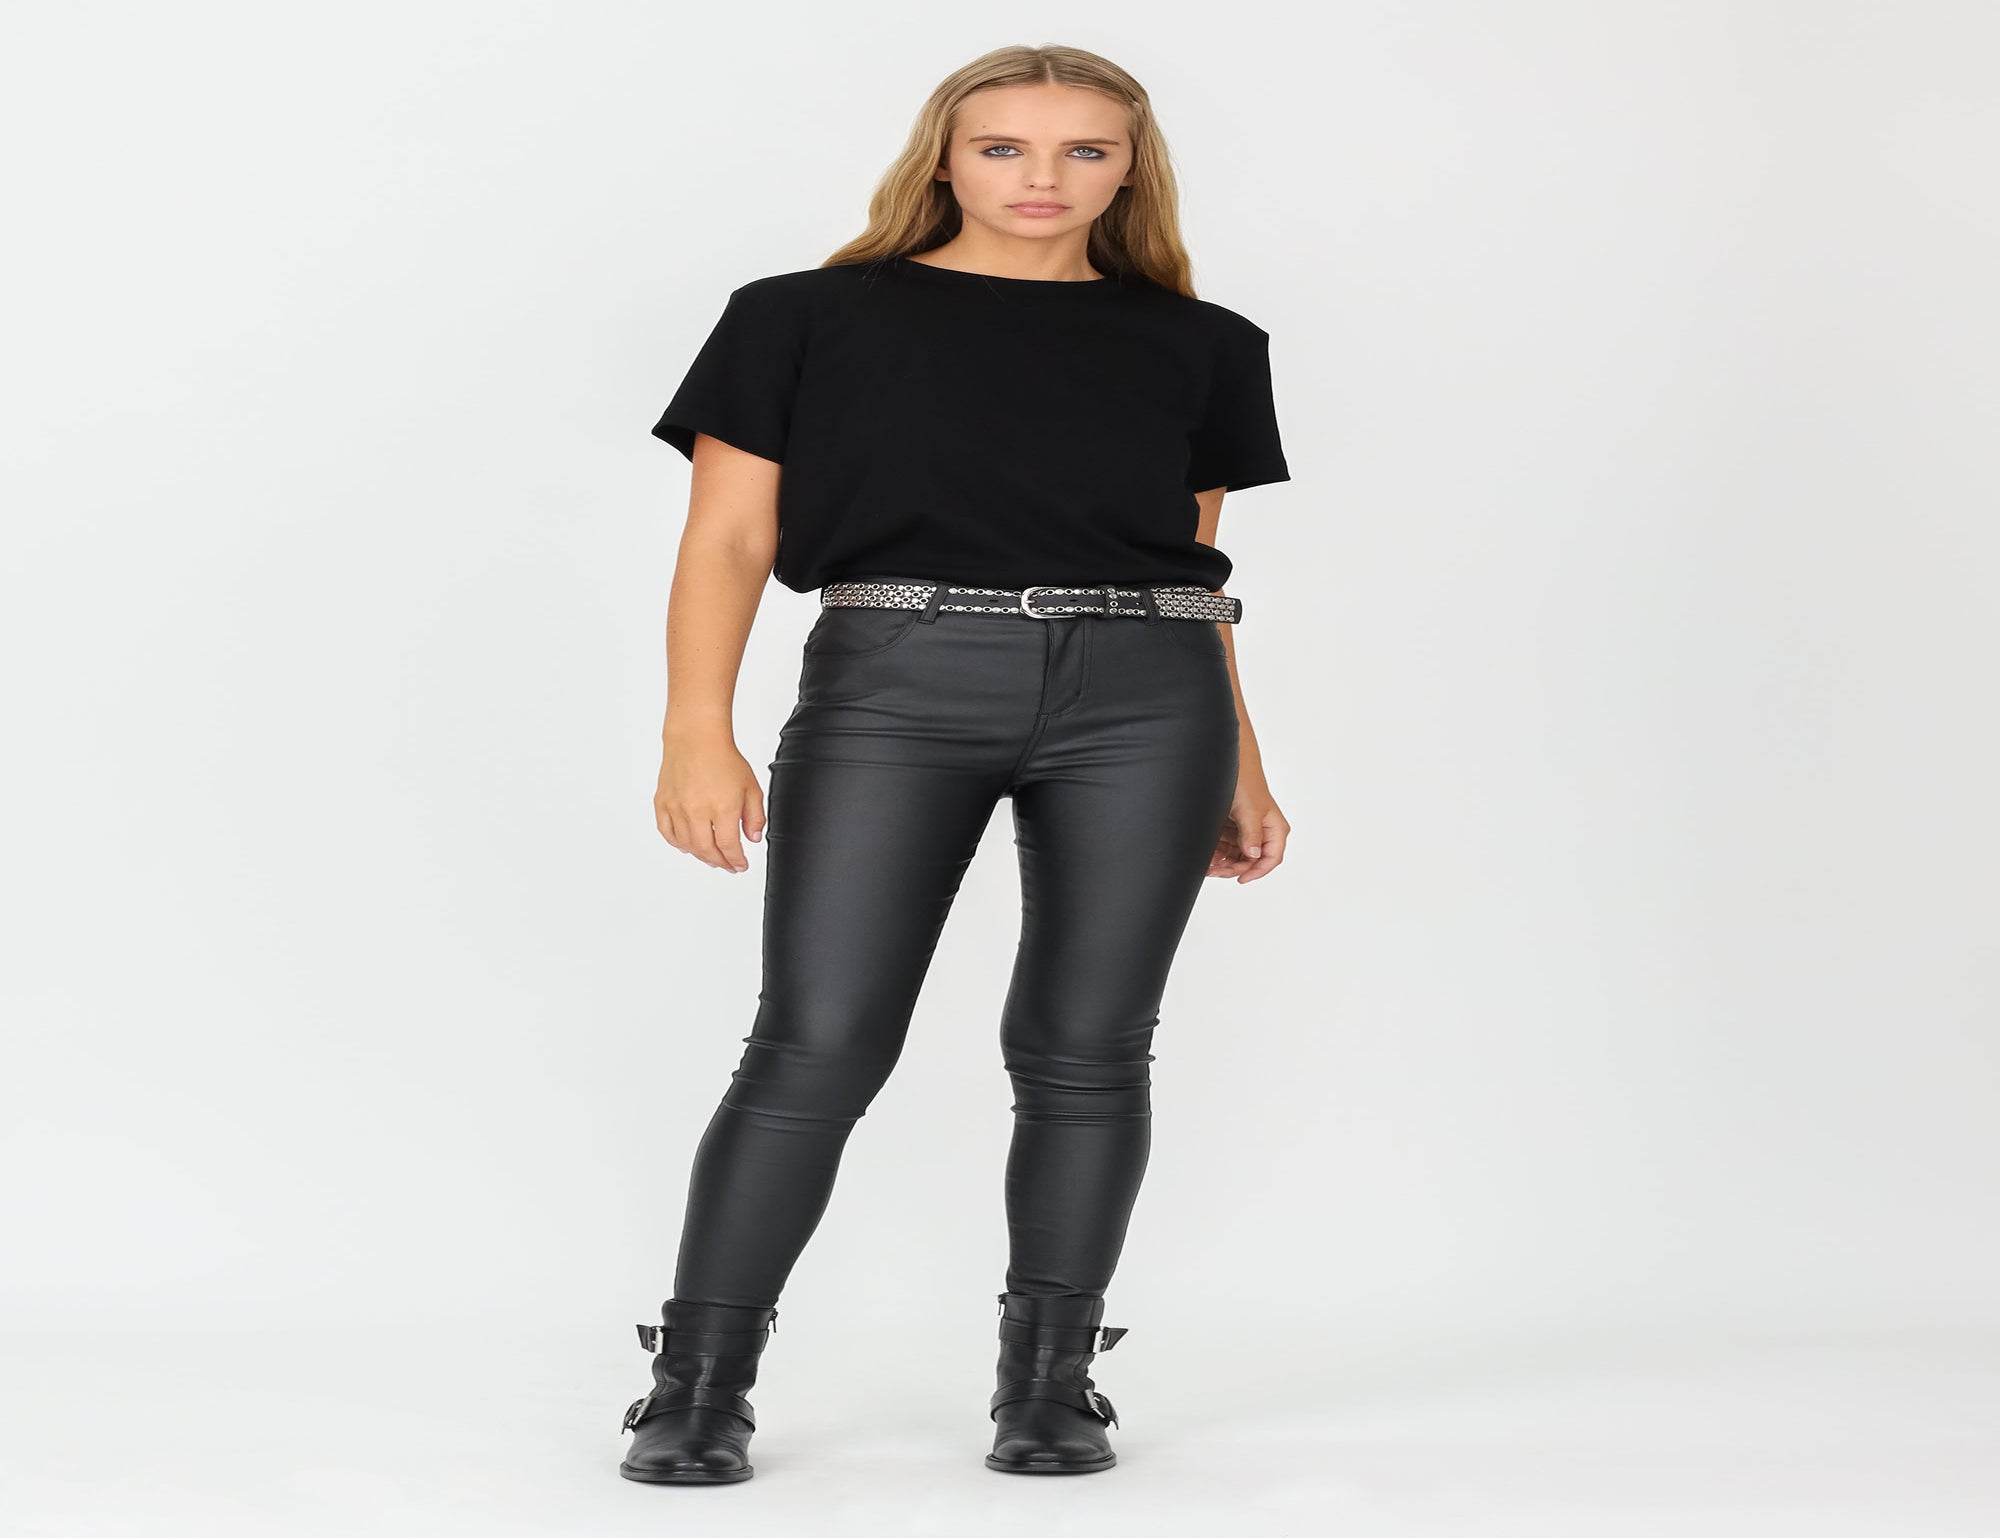 High Rise Leather Look Pant - Black - Pants - Full Length